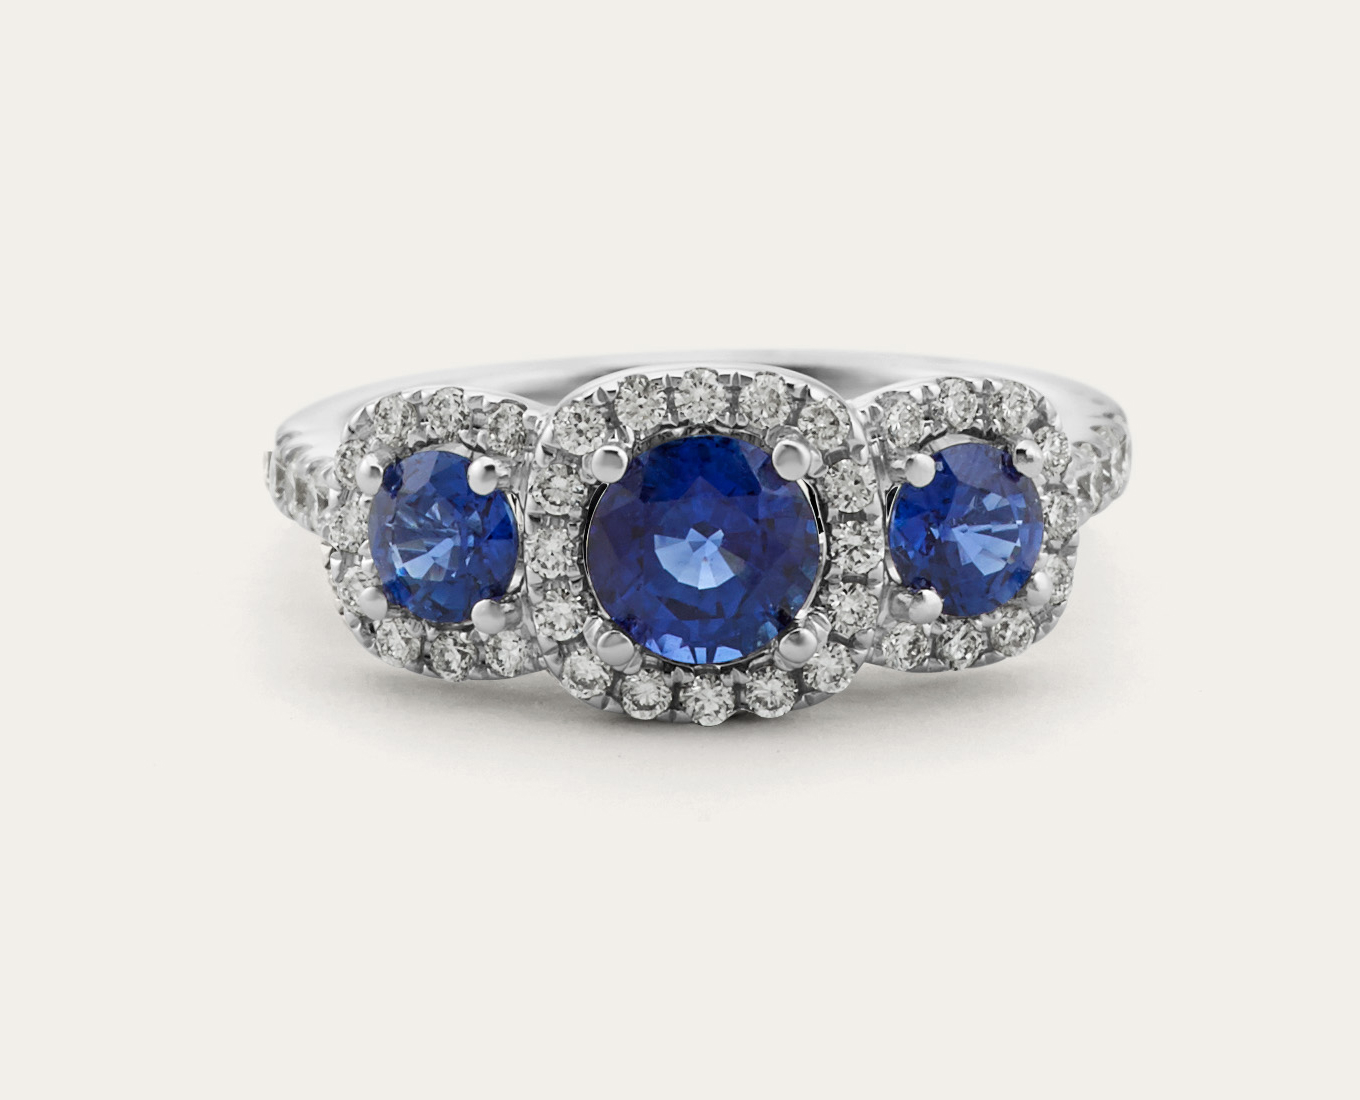 Capri Three-Stone Sapphire & Diamond Ring Each natural sapphire in this stunning three-stone ring has its own sparkling halo of natural diamonds. Crafted in bright 14-karat white gold, this ring has beautiful hidden details with swirled milgrain and an additional natural sapphire accent visible along the profile.